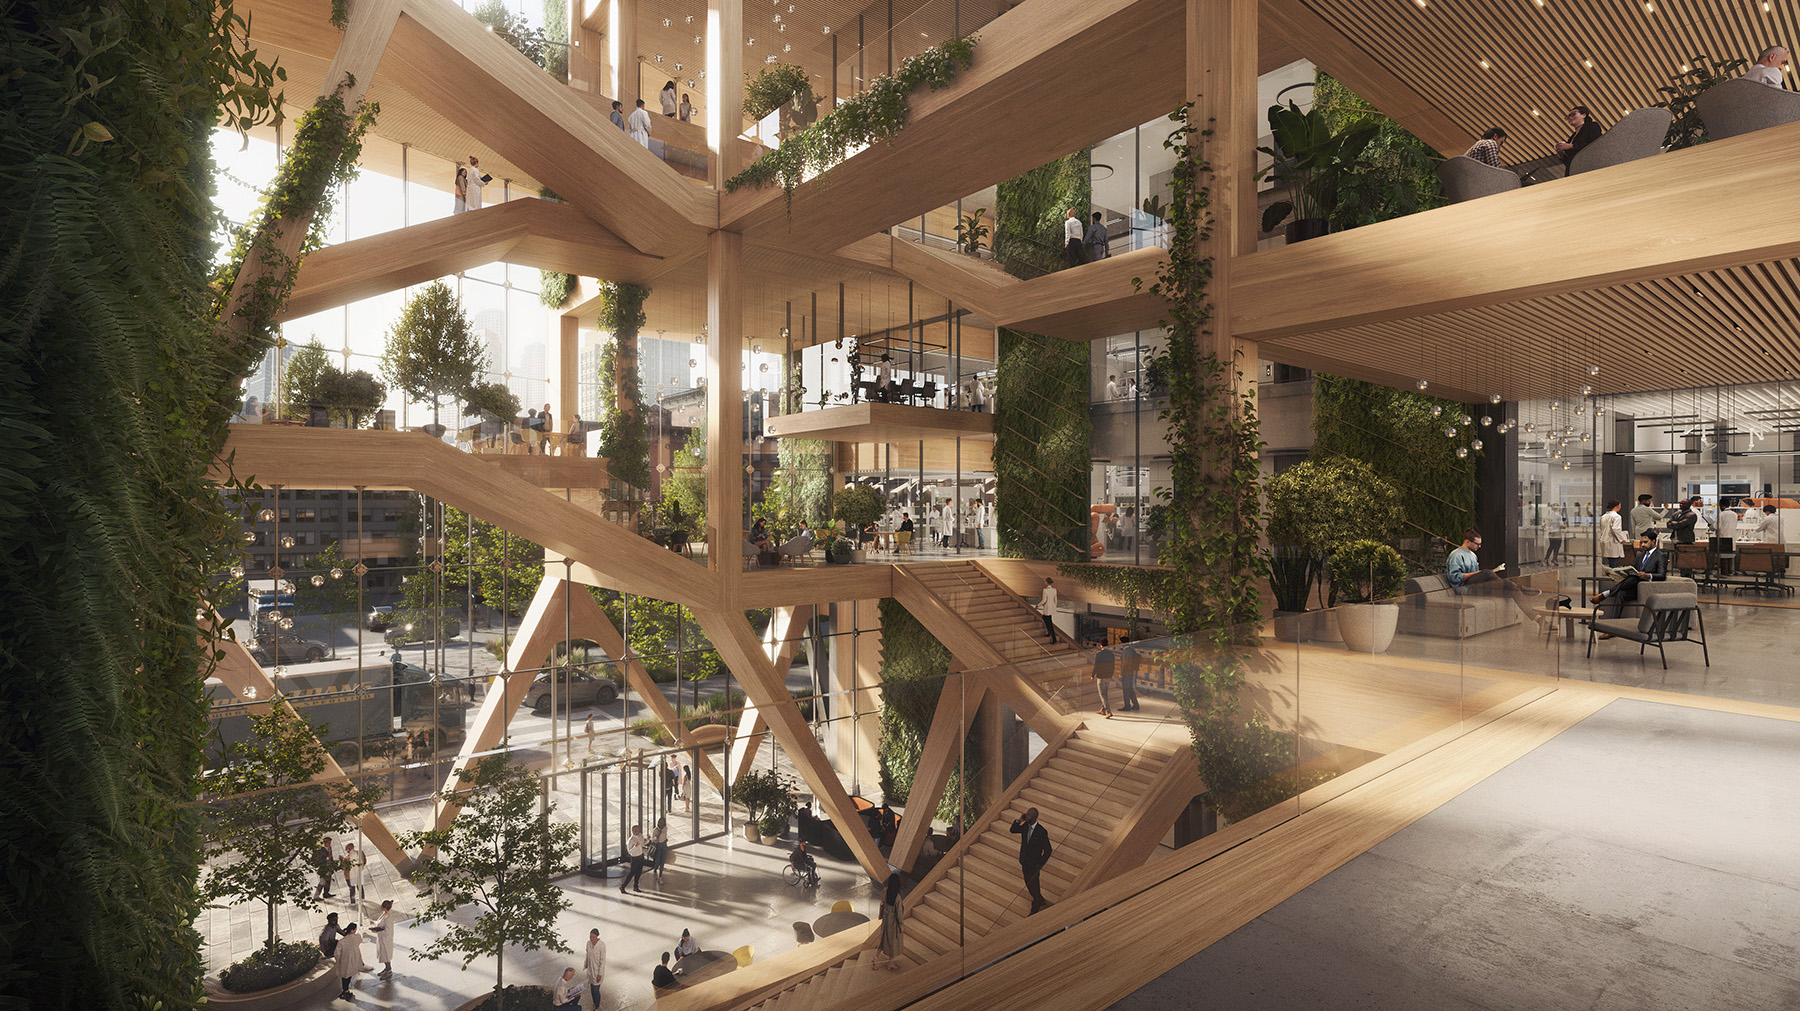 The rendering shows the interior of a multistory atrium with greenery and a monumental staircase. 